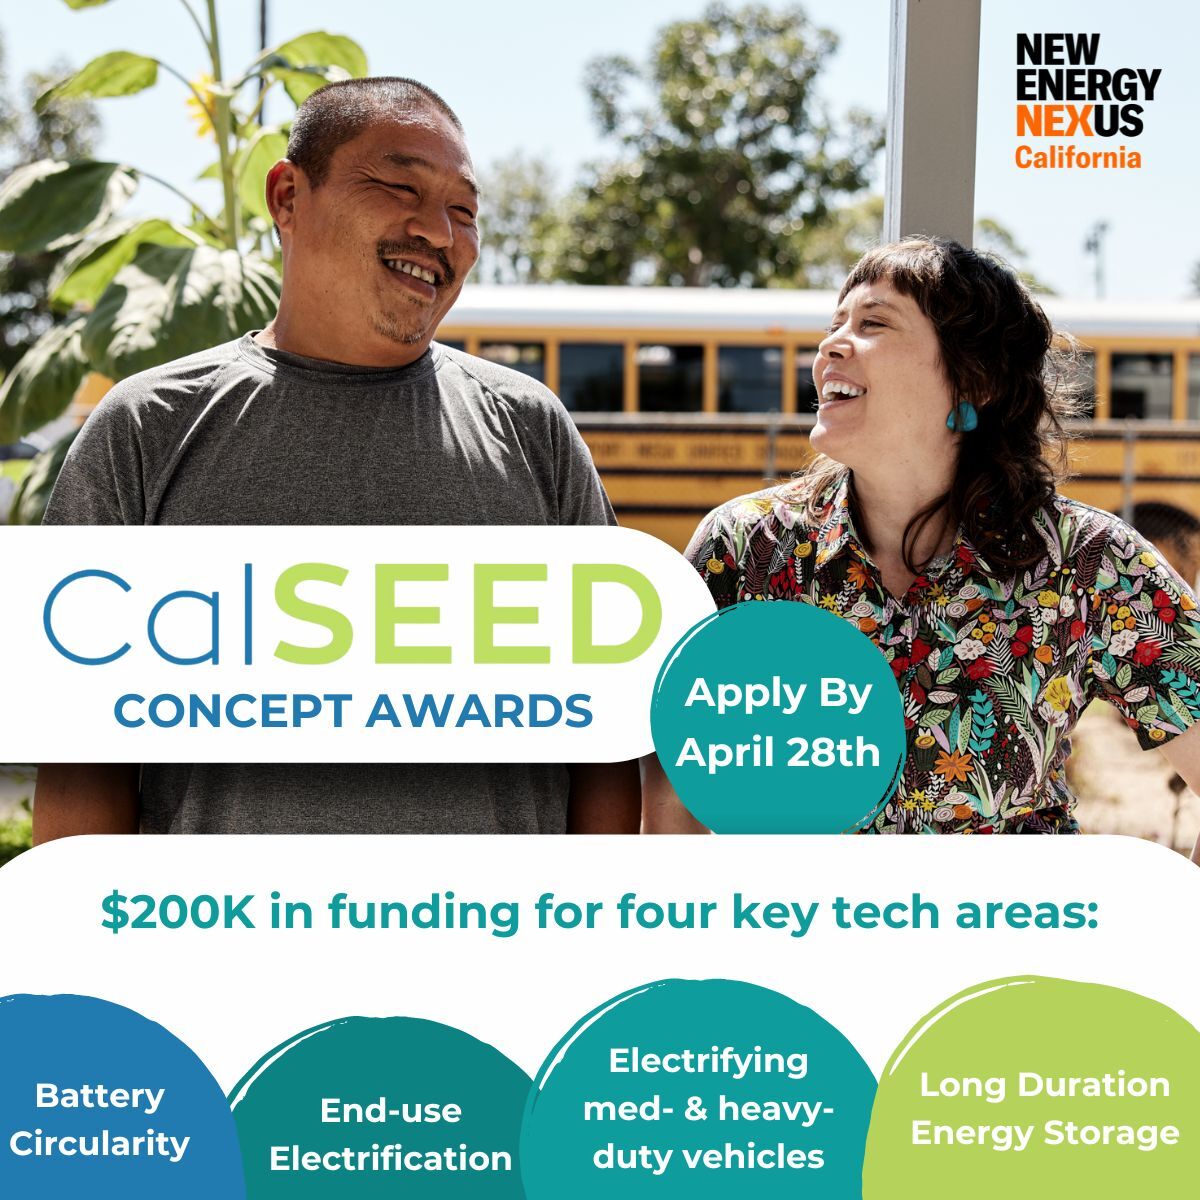 ⏰ Act fast! Applications are open until 28 Apr to apply for @Cal_SEED's Concept Award of $200K ➡ cutt.ly/mw0xLh25 Be part of CalSEED's next cohort and let's make California's clean energy future inclusive & diverse! Info session recording: cutt.ly/2w6awXU0